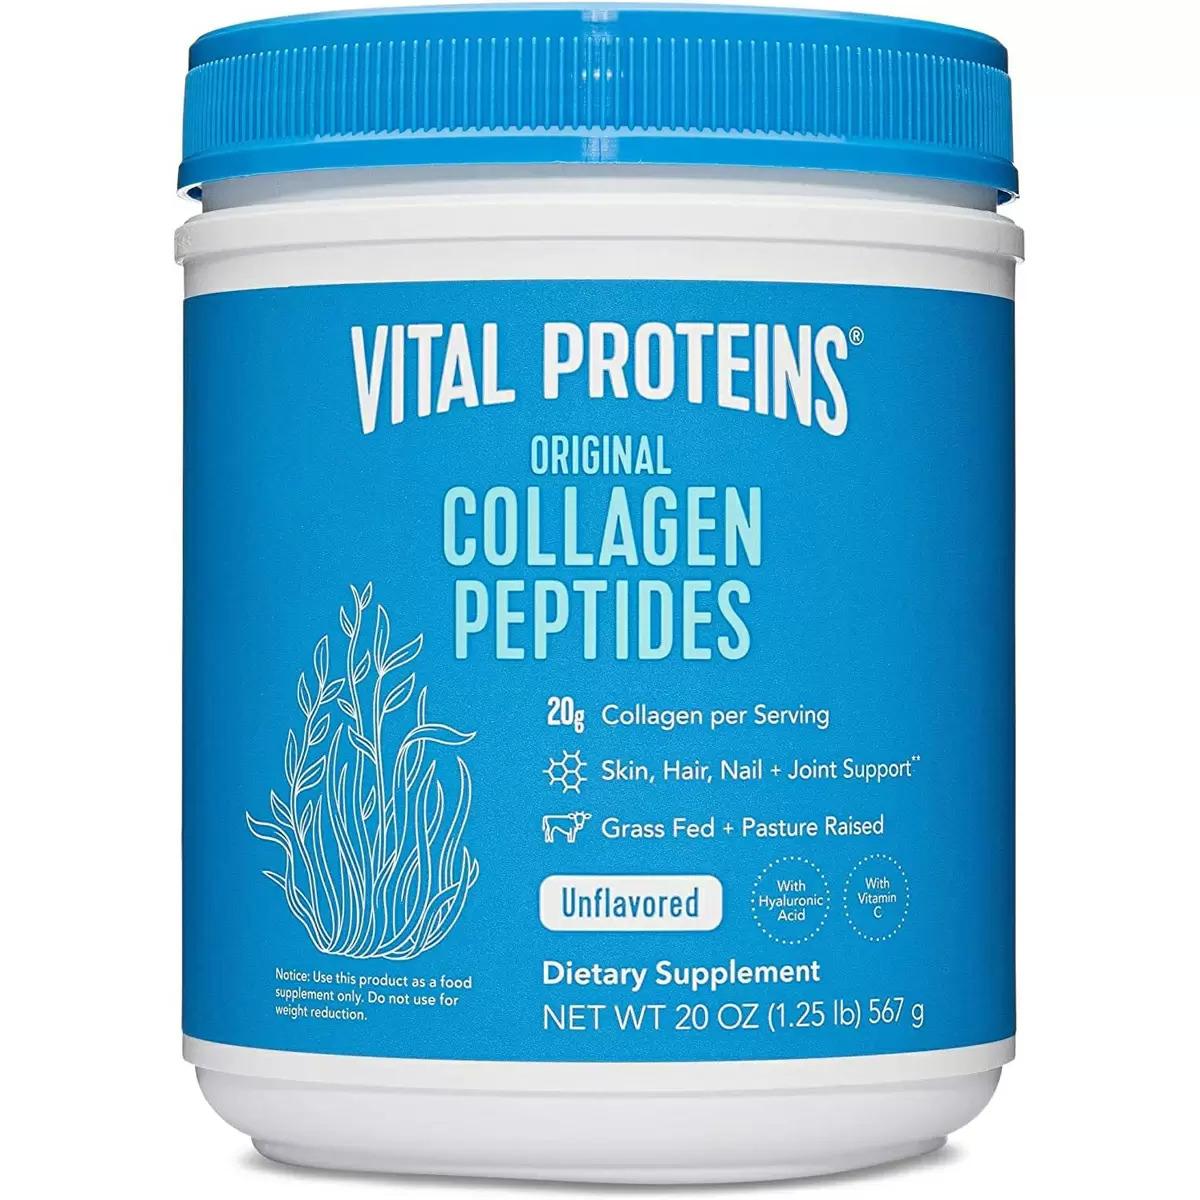 Vital Proteins Collagen Peptides Powder with Hyaluronic Acid for $32.49 Shipped